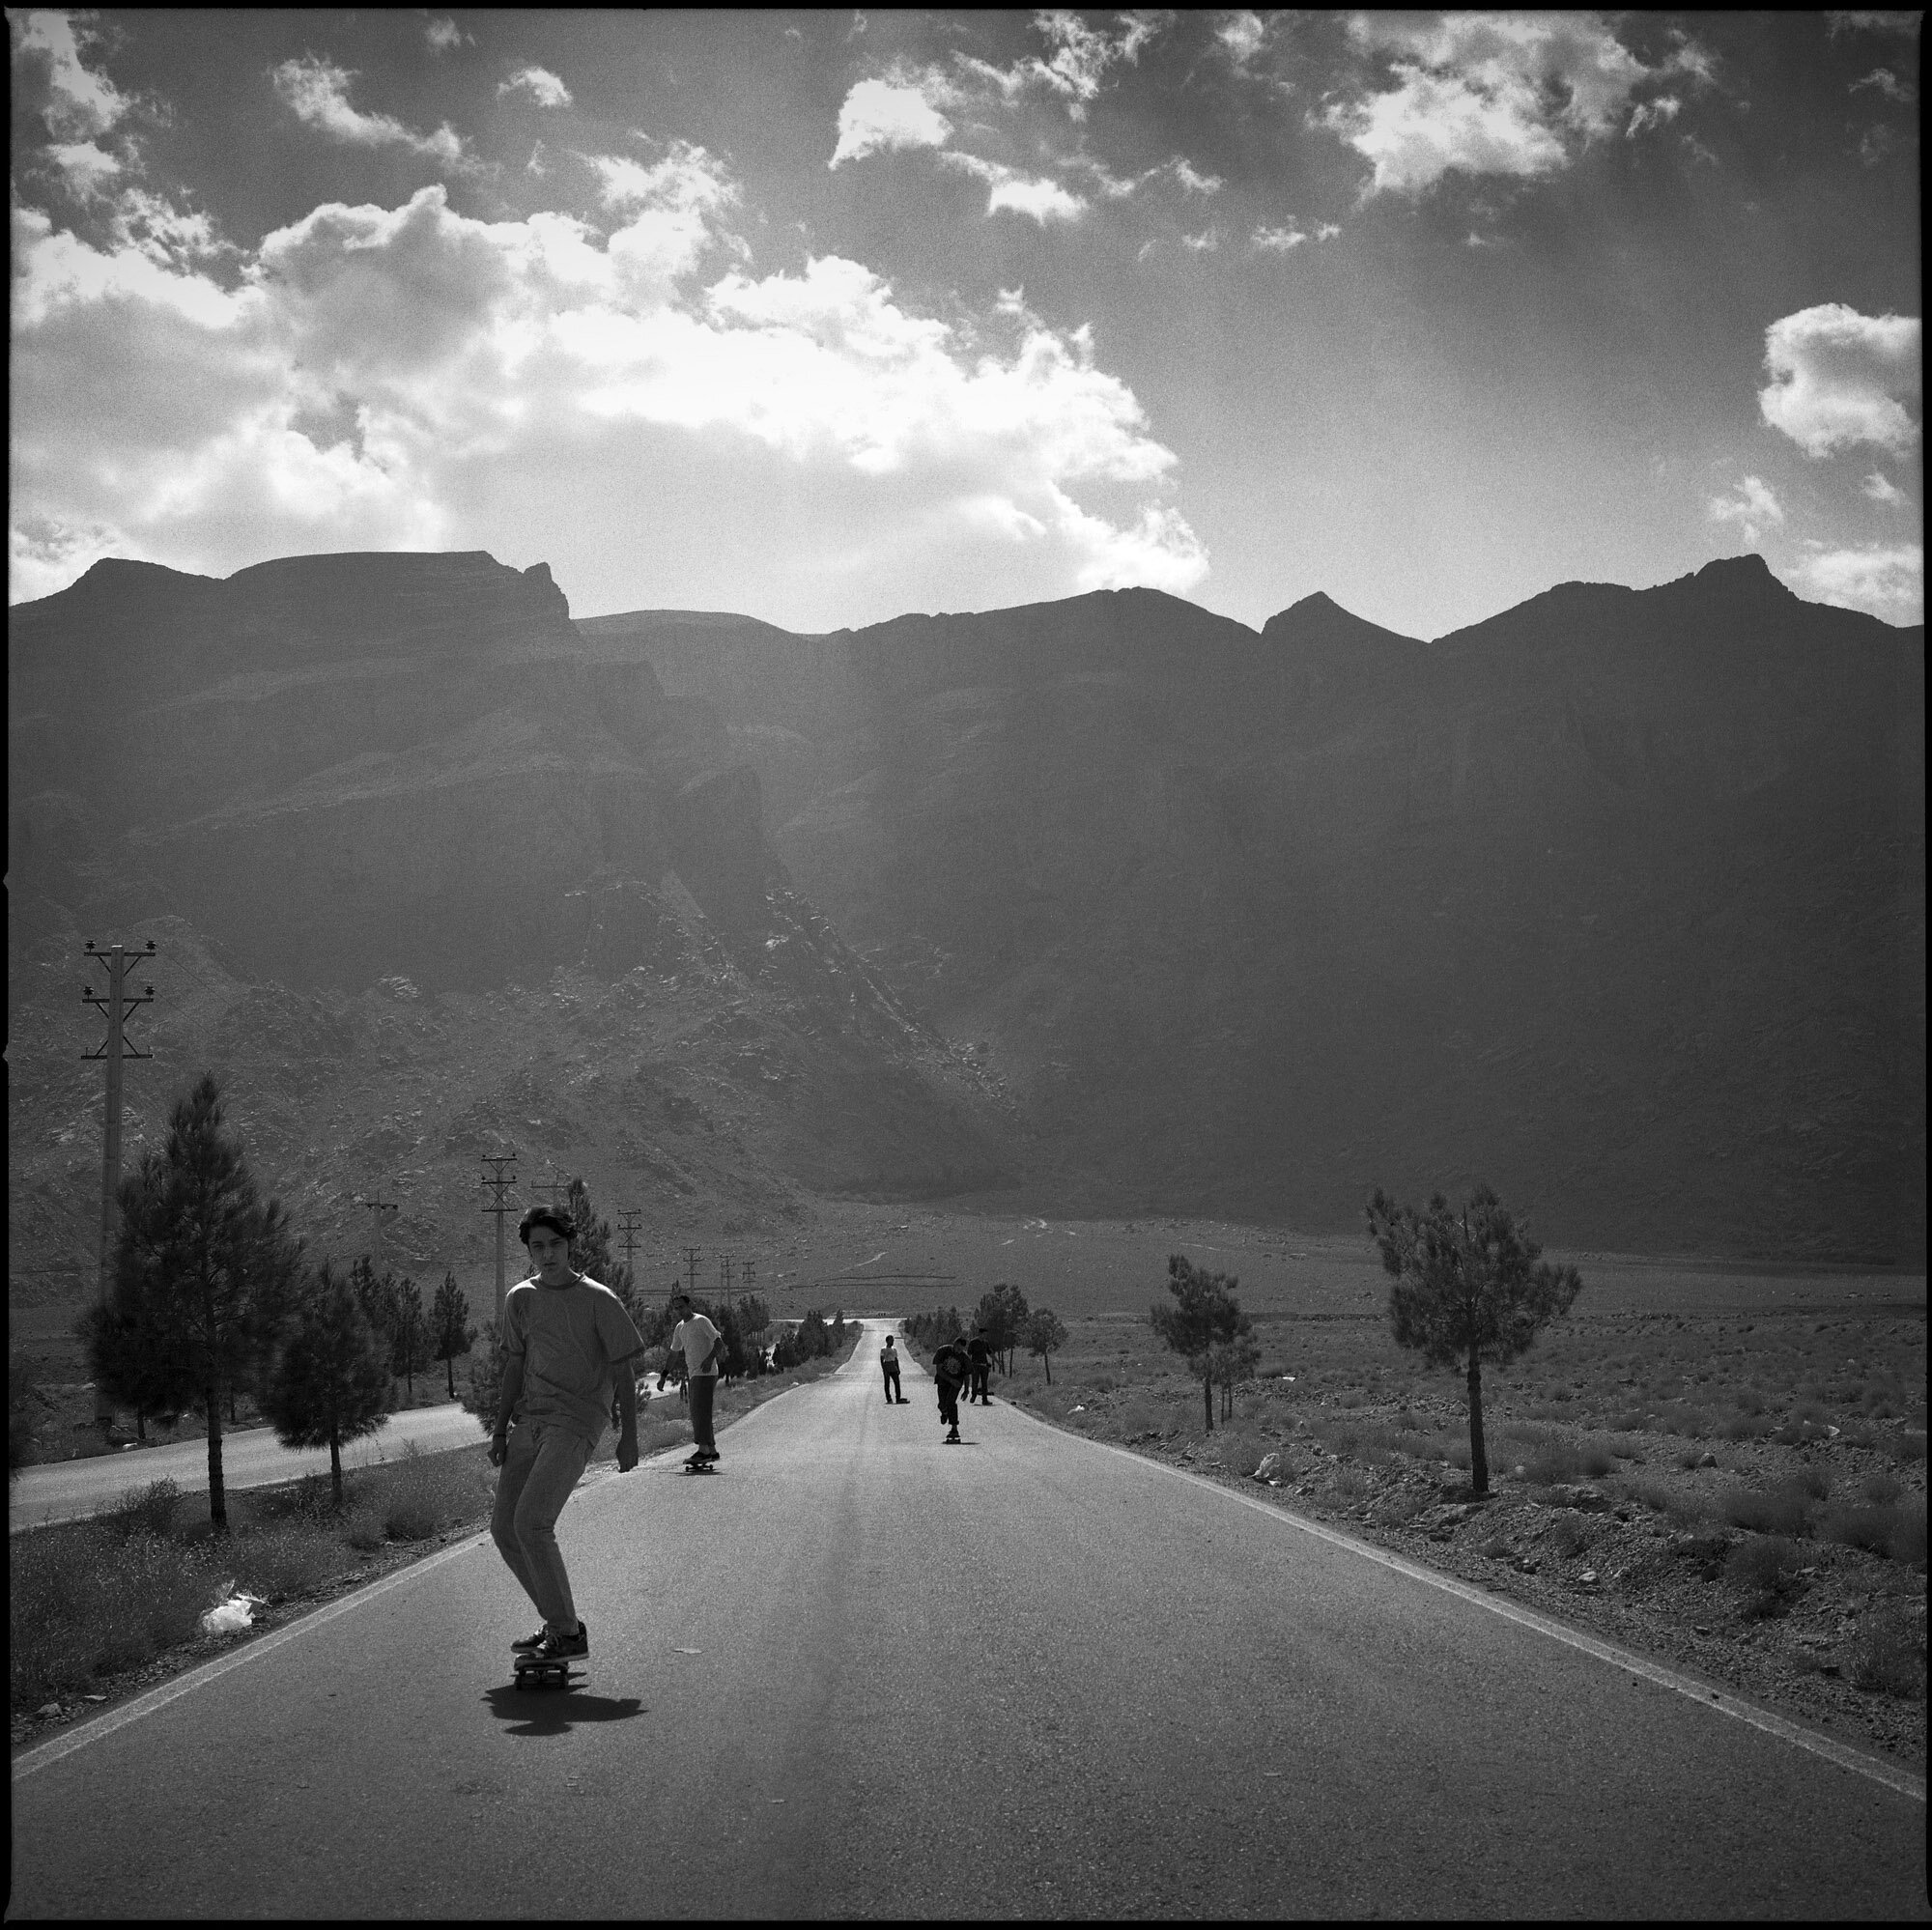  A group of skateboarders from Tehran stop near Yazd to ride on roads through the Iranian mountain landscape. Yazd, Iran, October 1, 2015. 